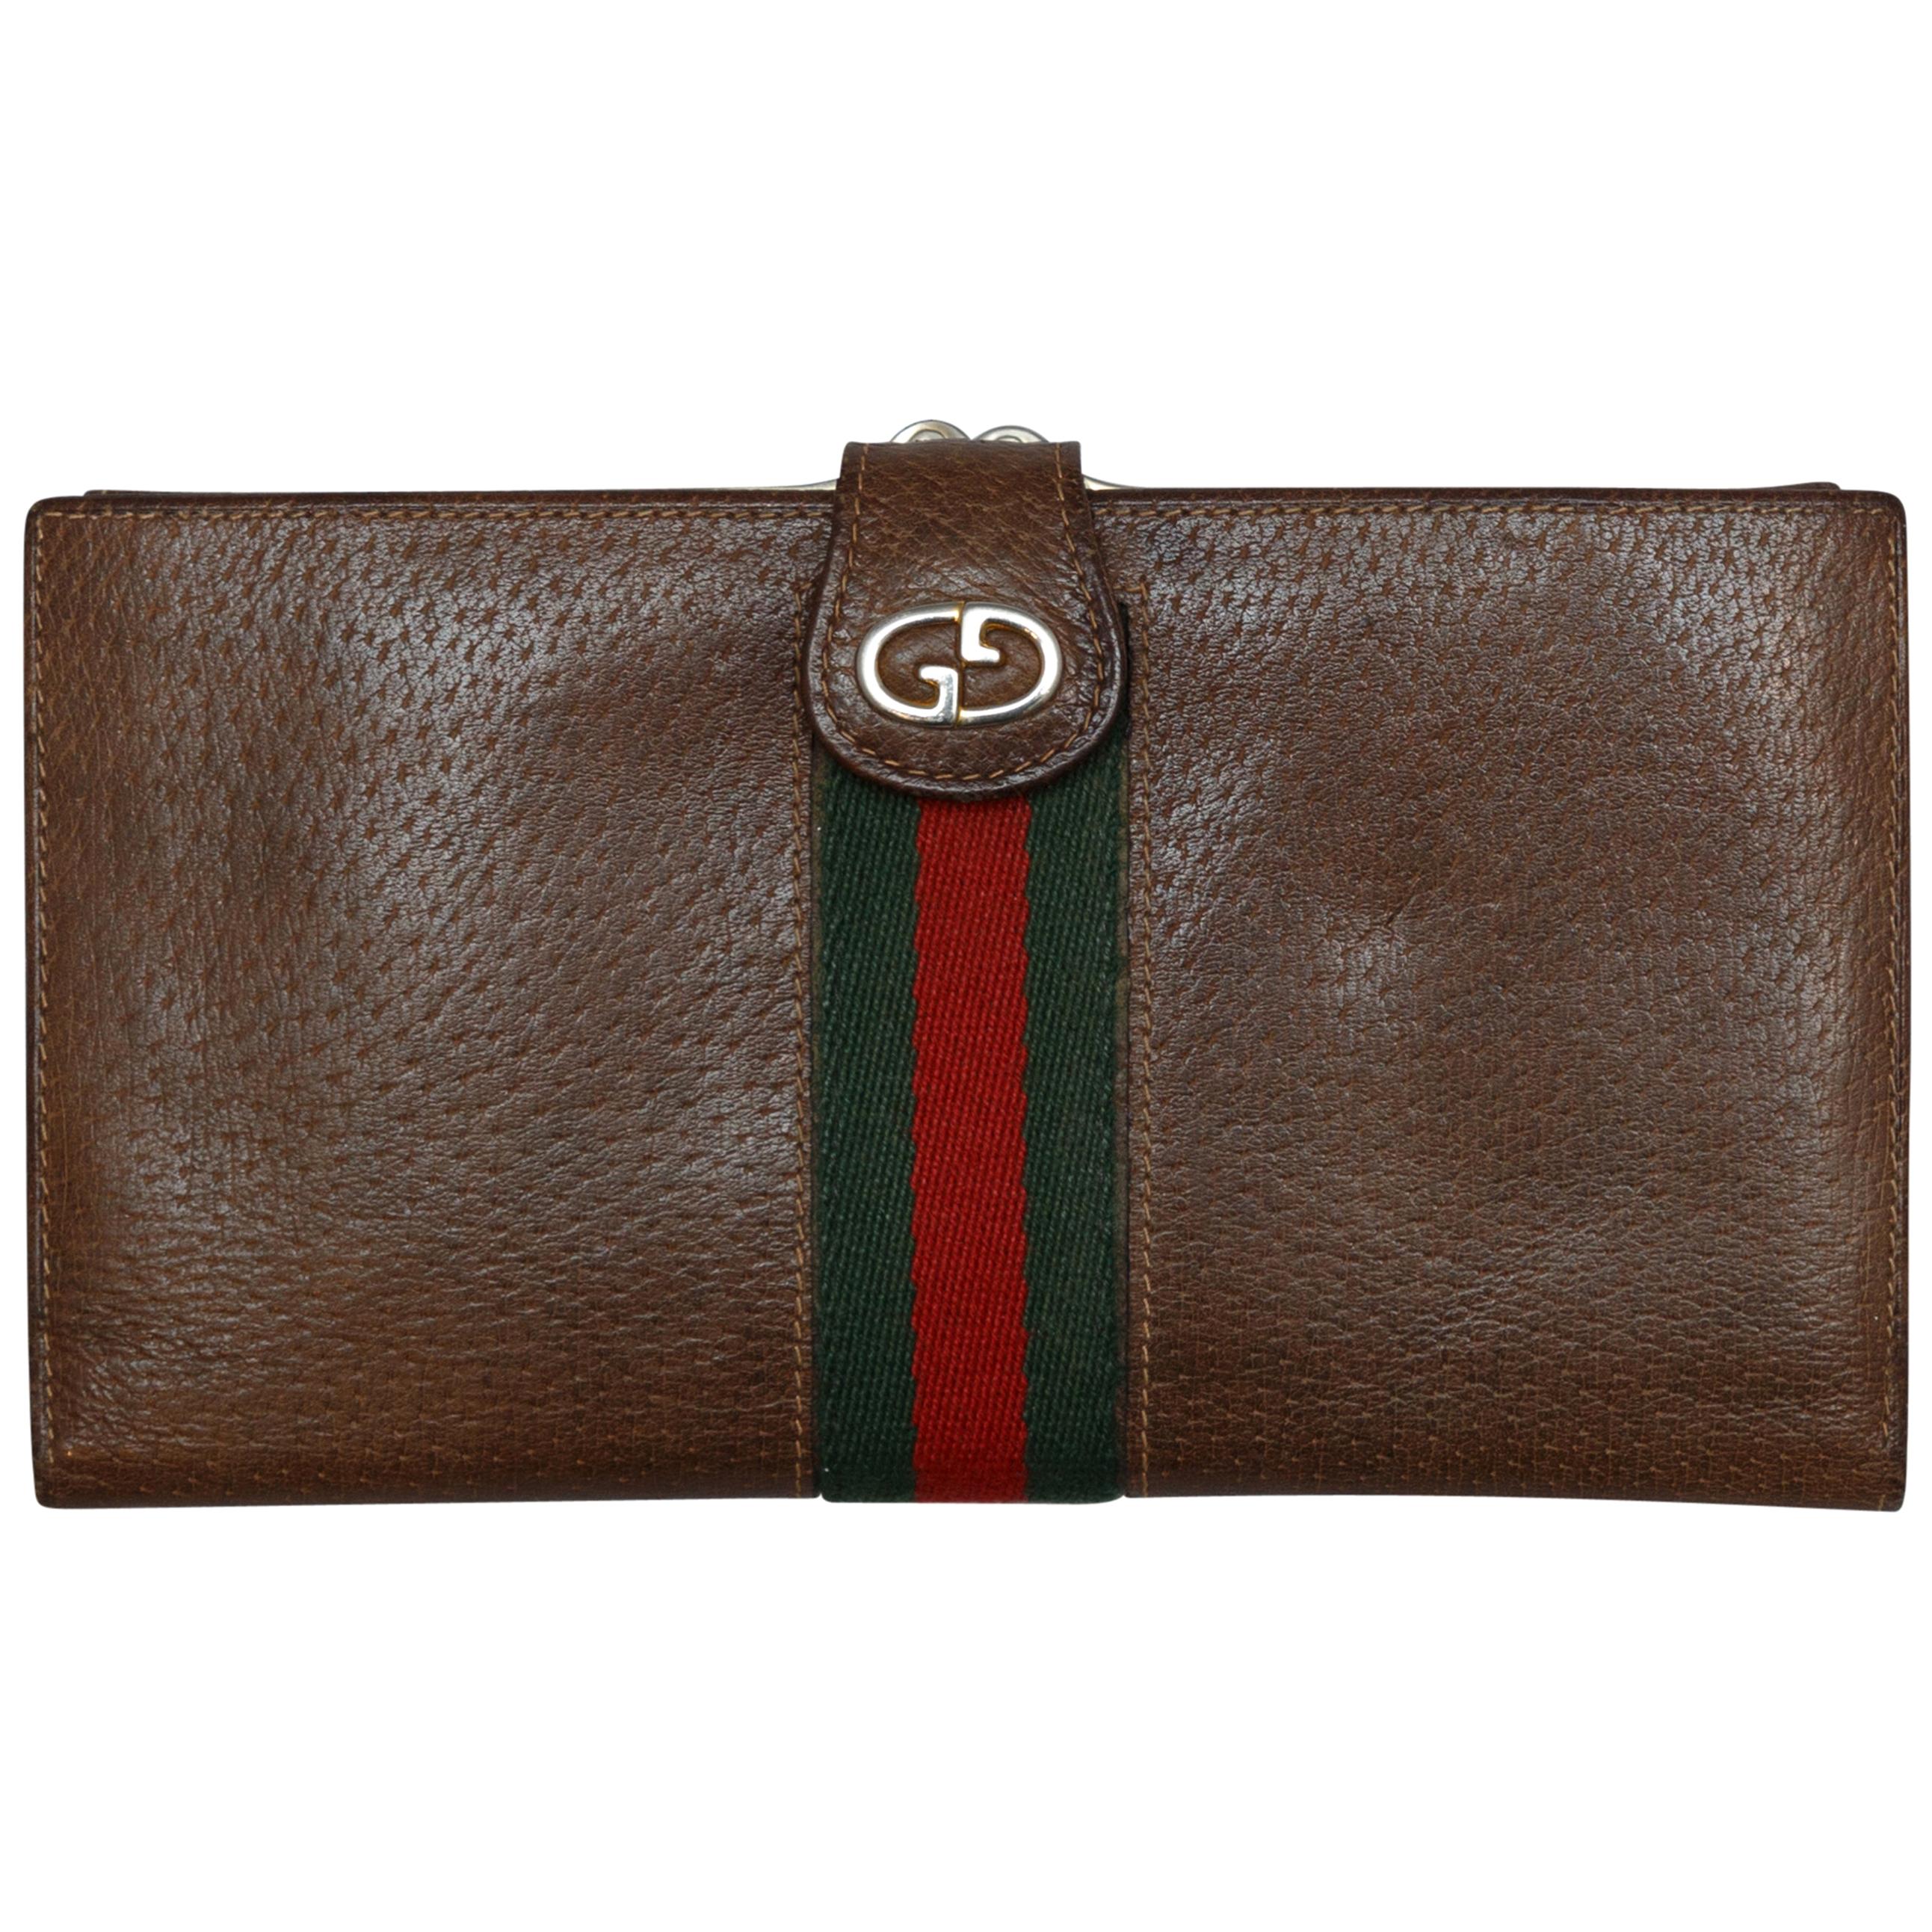 Gucci Brown Leather Web-Accented Wallet